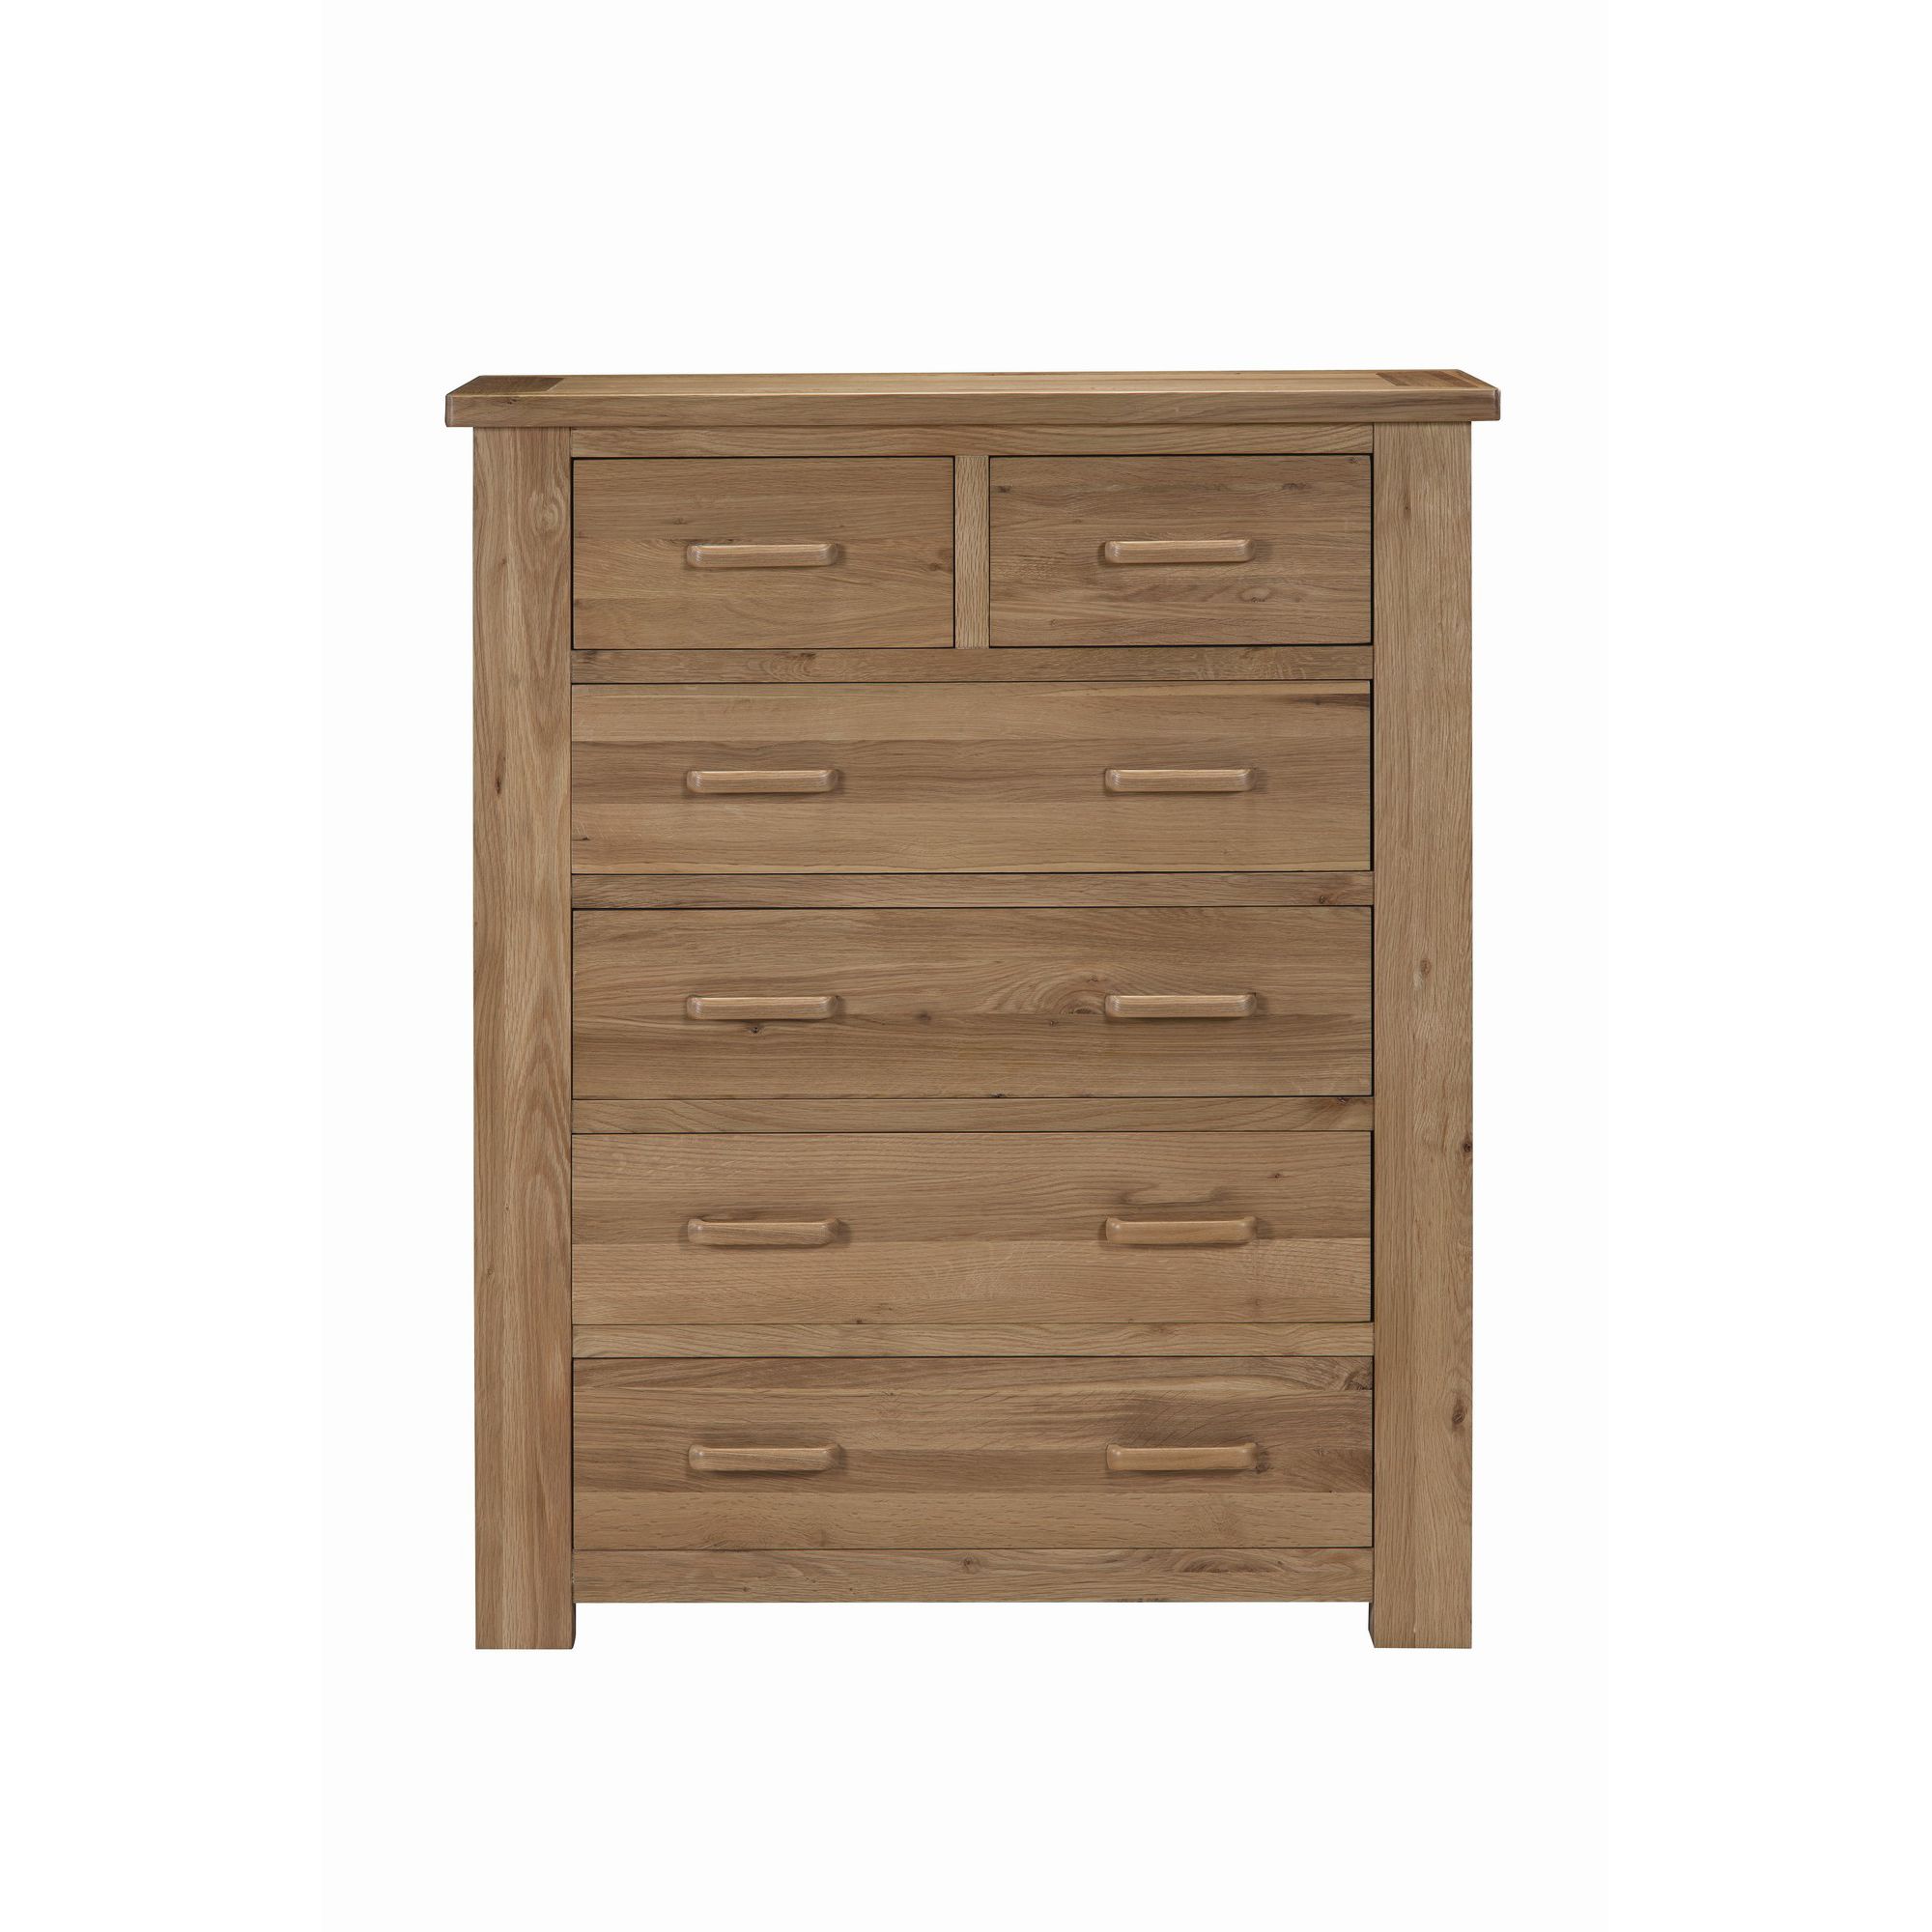 Alterton Furniture Wiltshire 2 Over 4 Drawer Chest at Tesco Direct